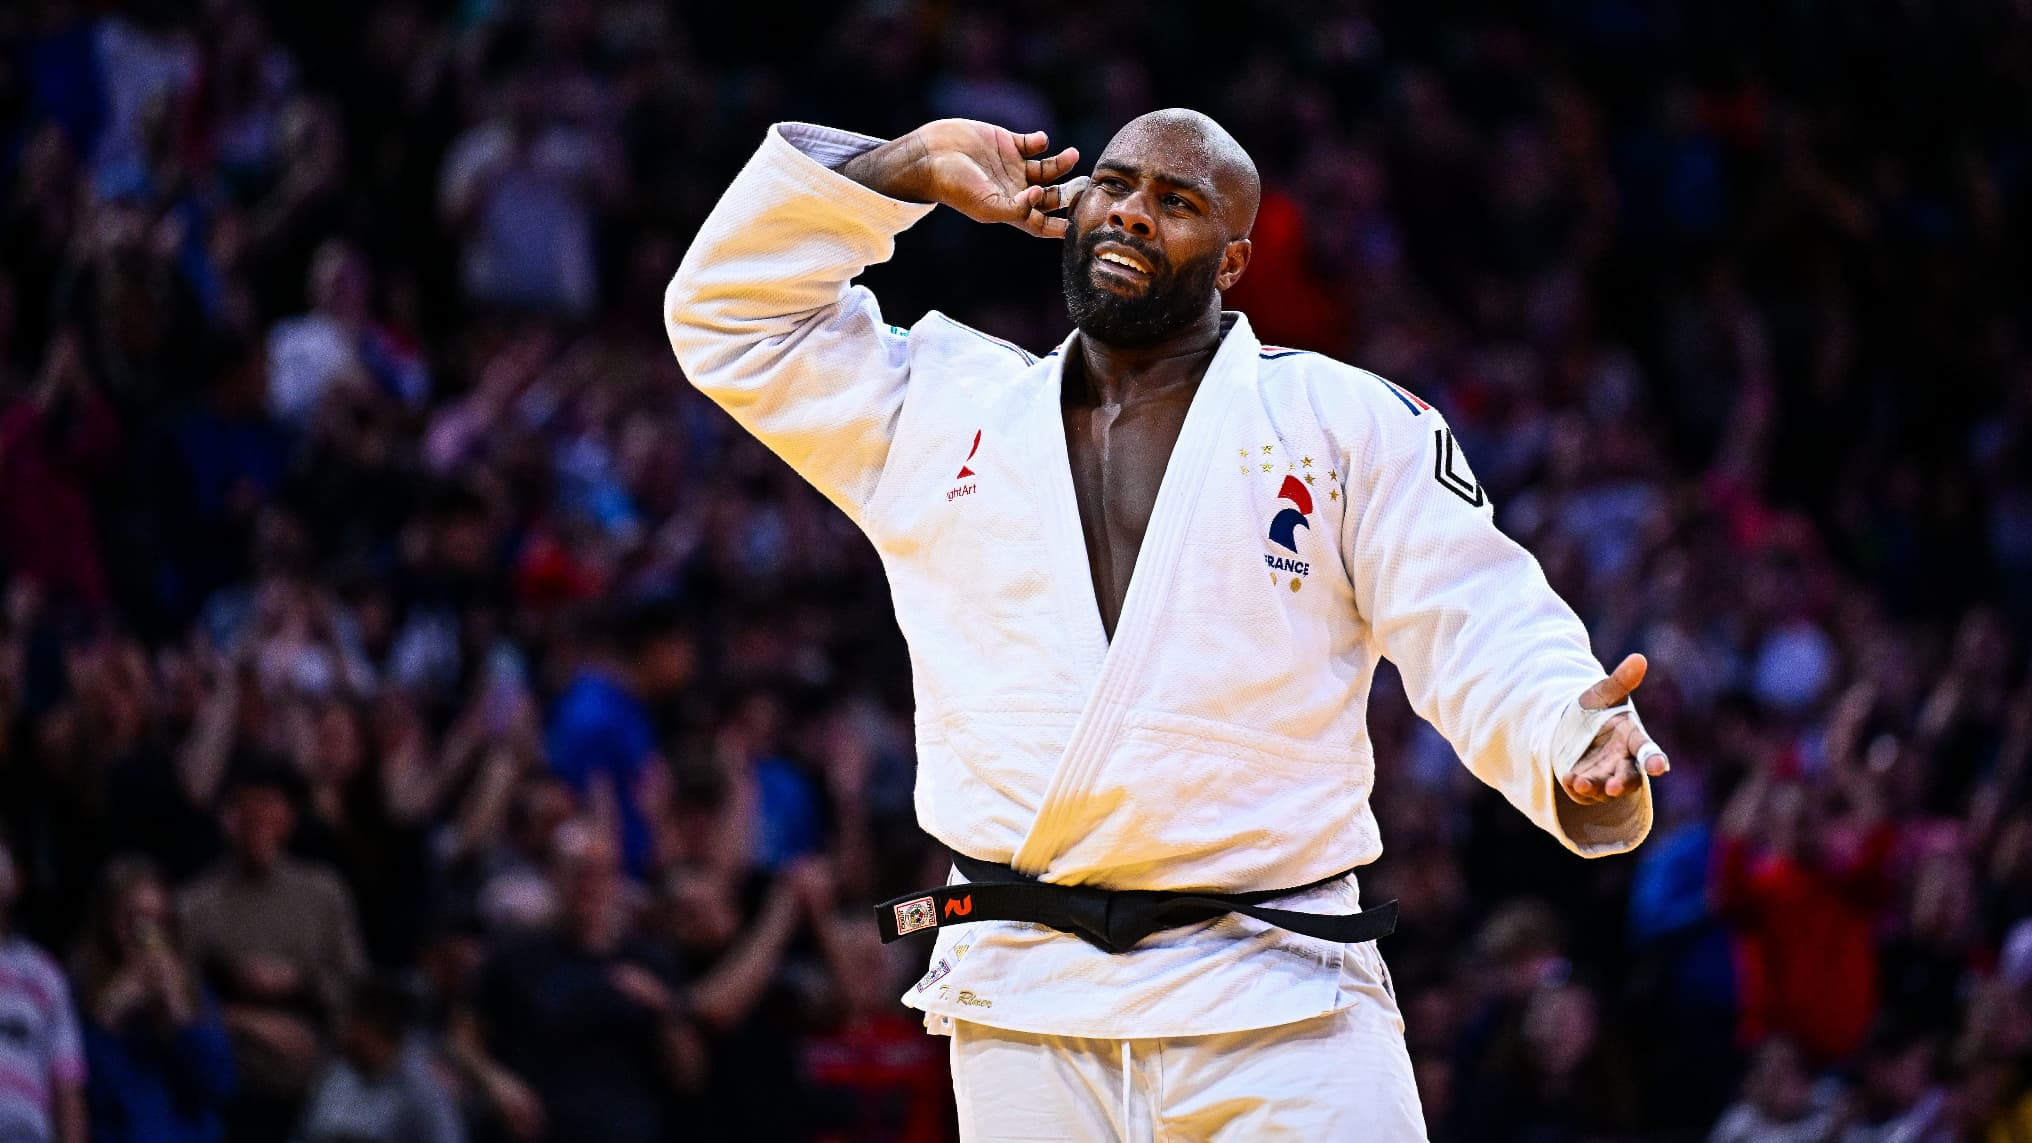 two months before the Olympics, Teddy Riner skips the world championships